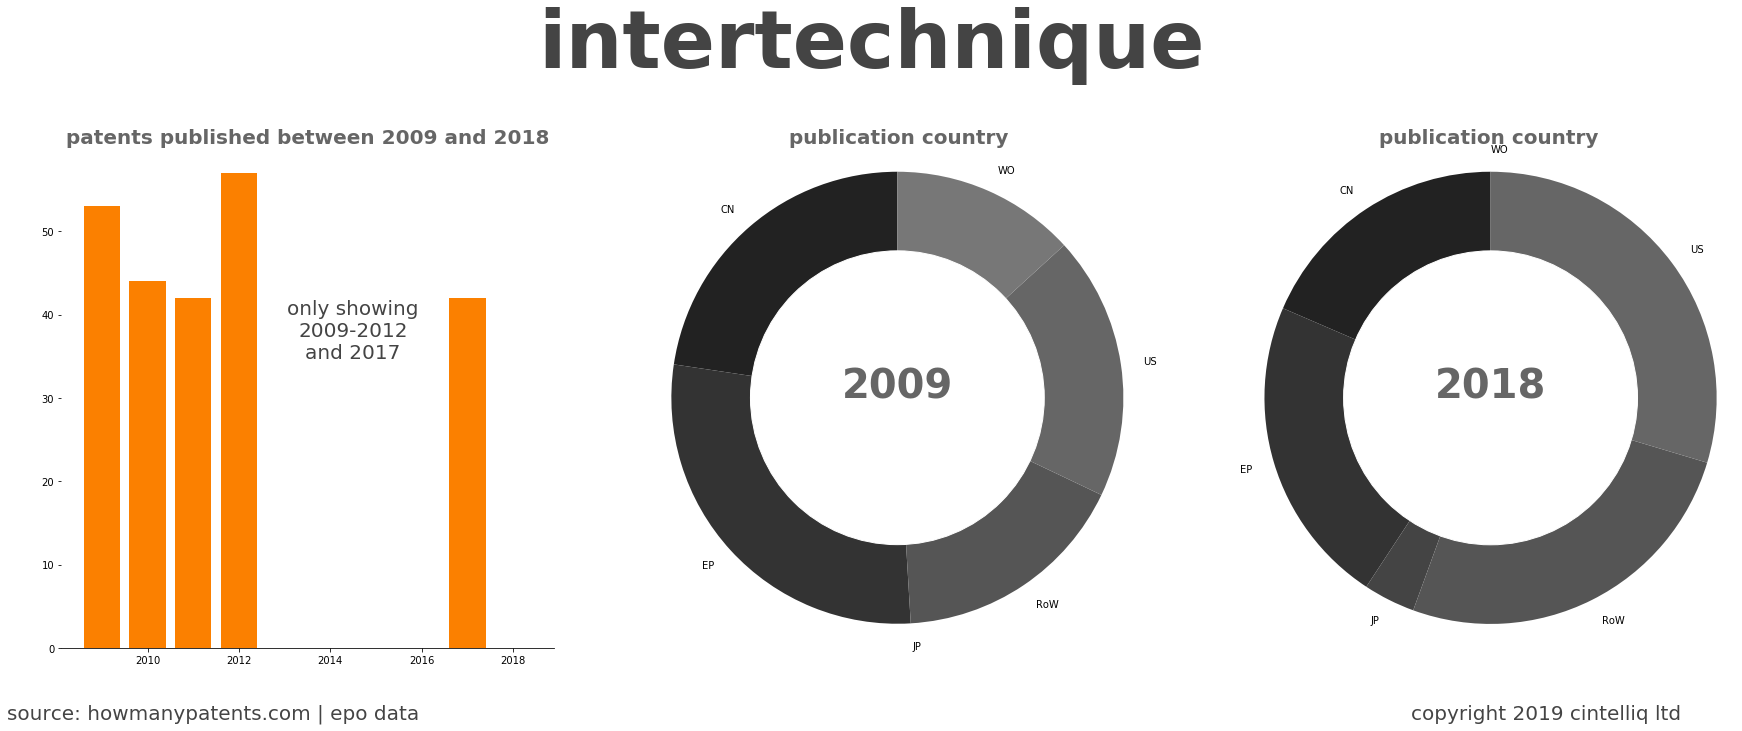 summary of patents for Intertechnique